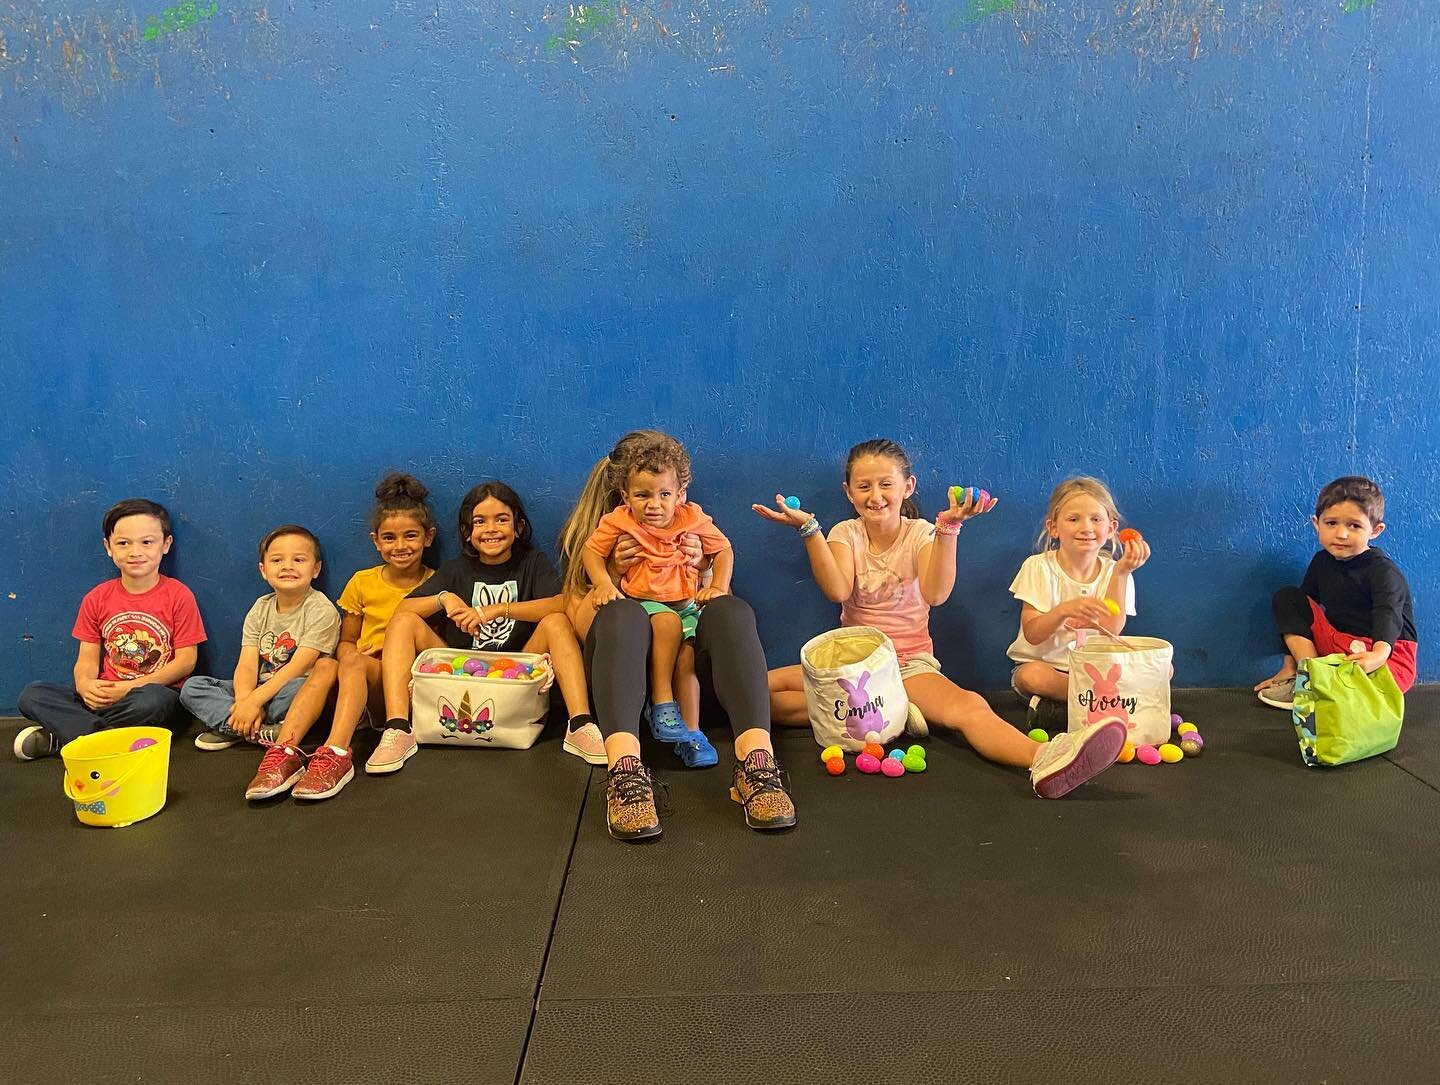 We love spoiling our future CrossFitters! They had a blast with our Easter Egg Hunt this morning! Happy Easter 🐣🐰 #crossfitaero #easteregghunt #futurecrossfitters